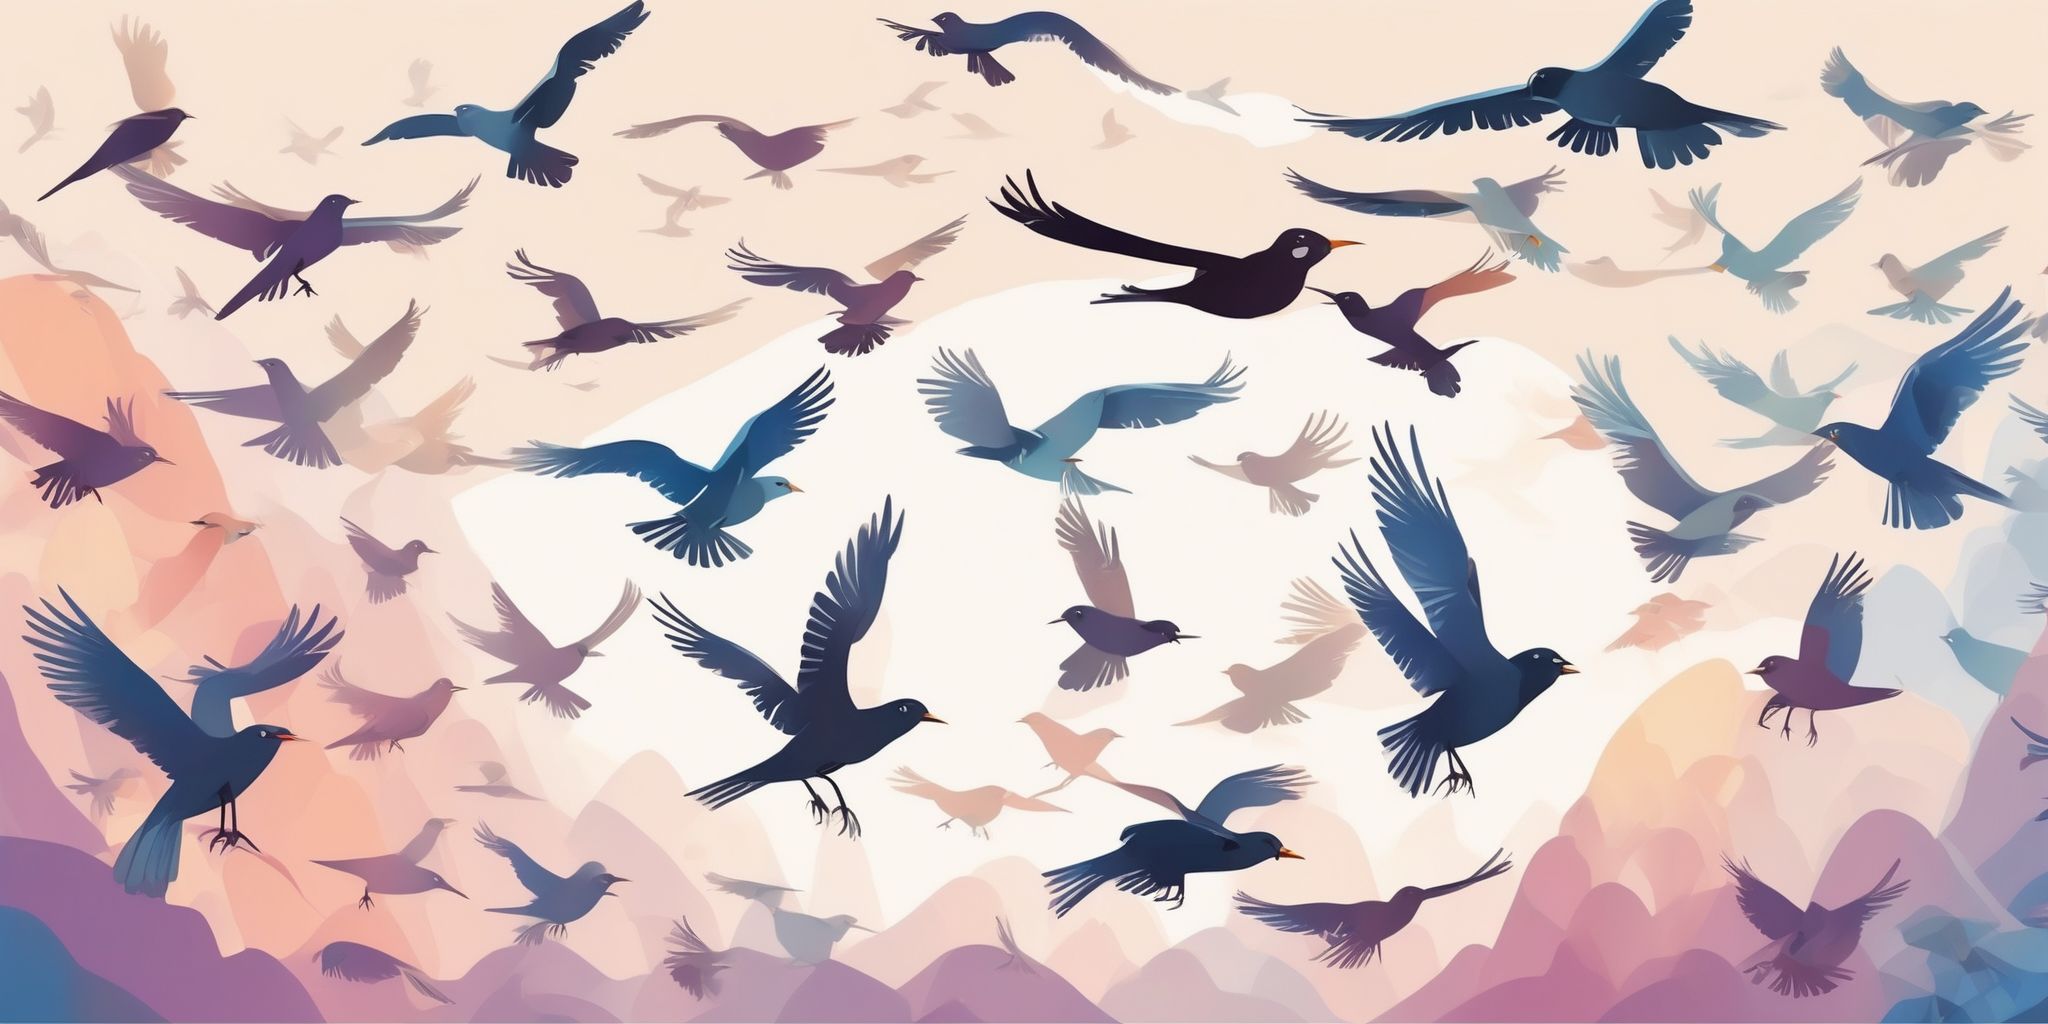 Birds soaring in illustration style with gradients and white background